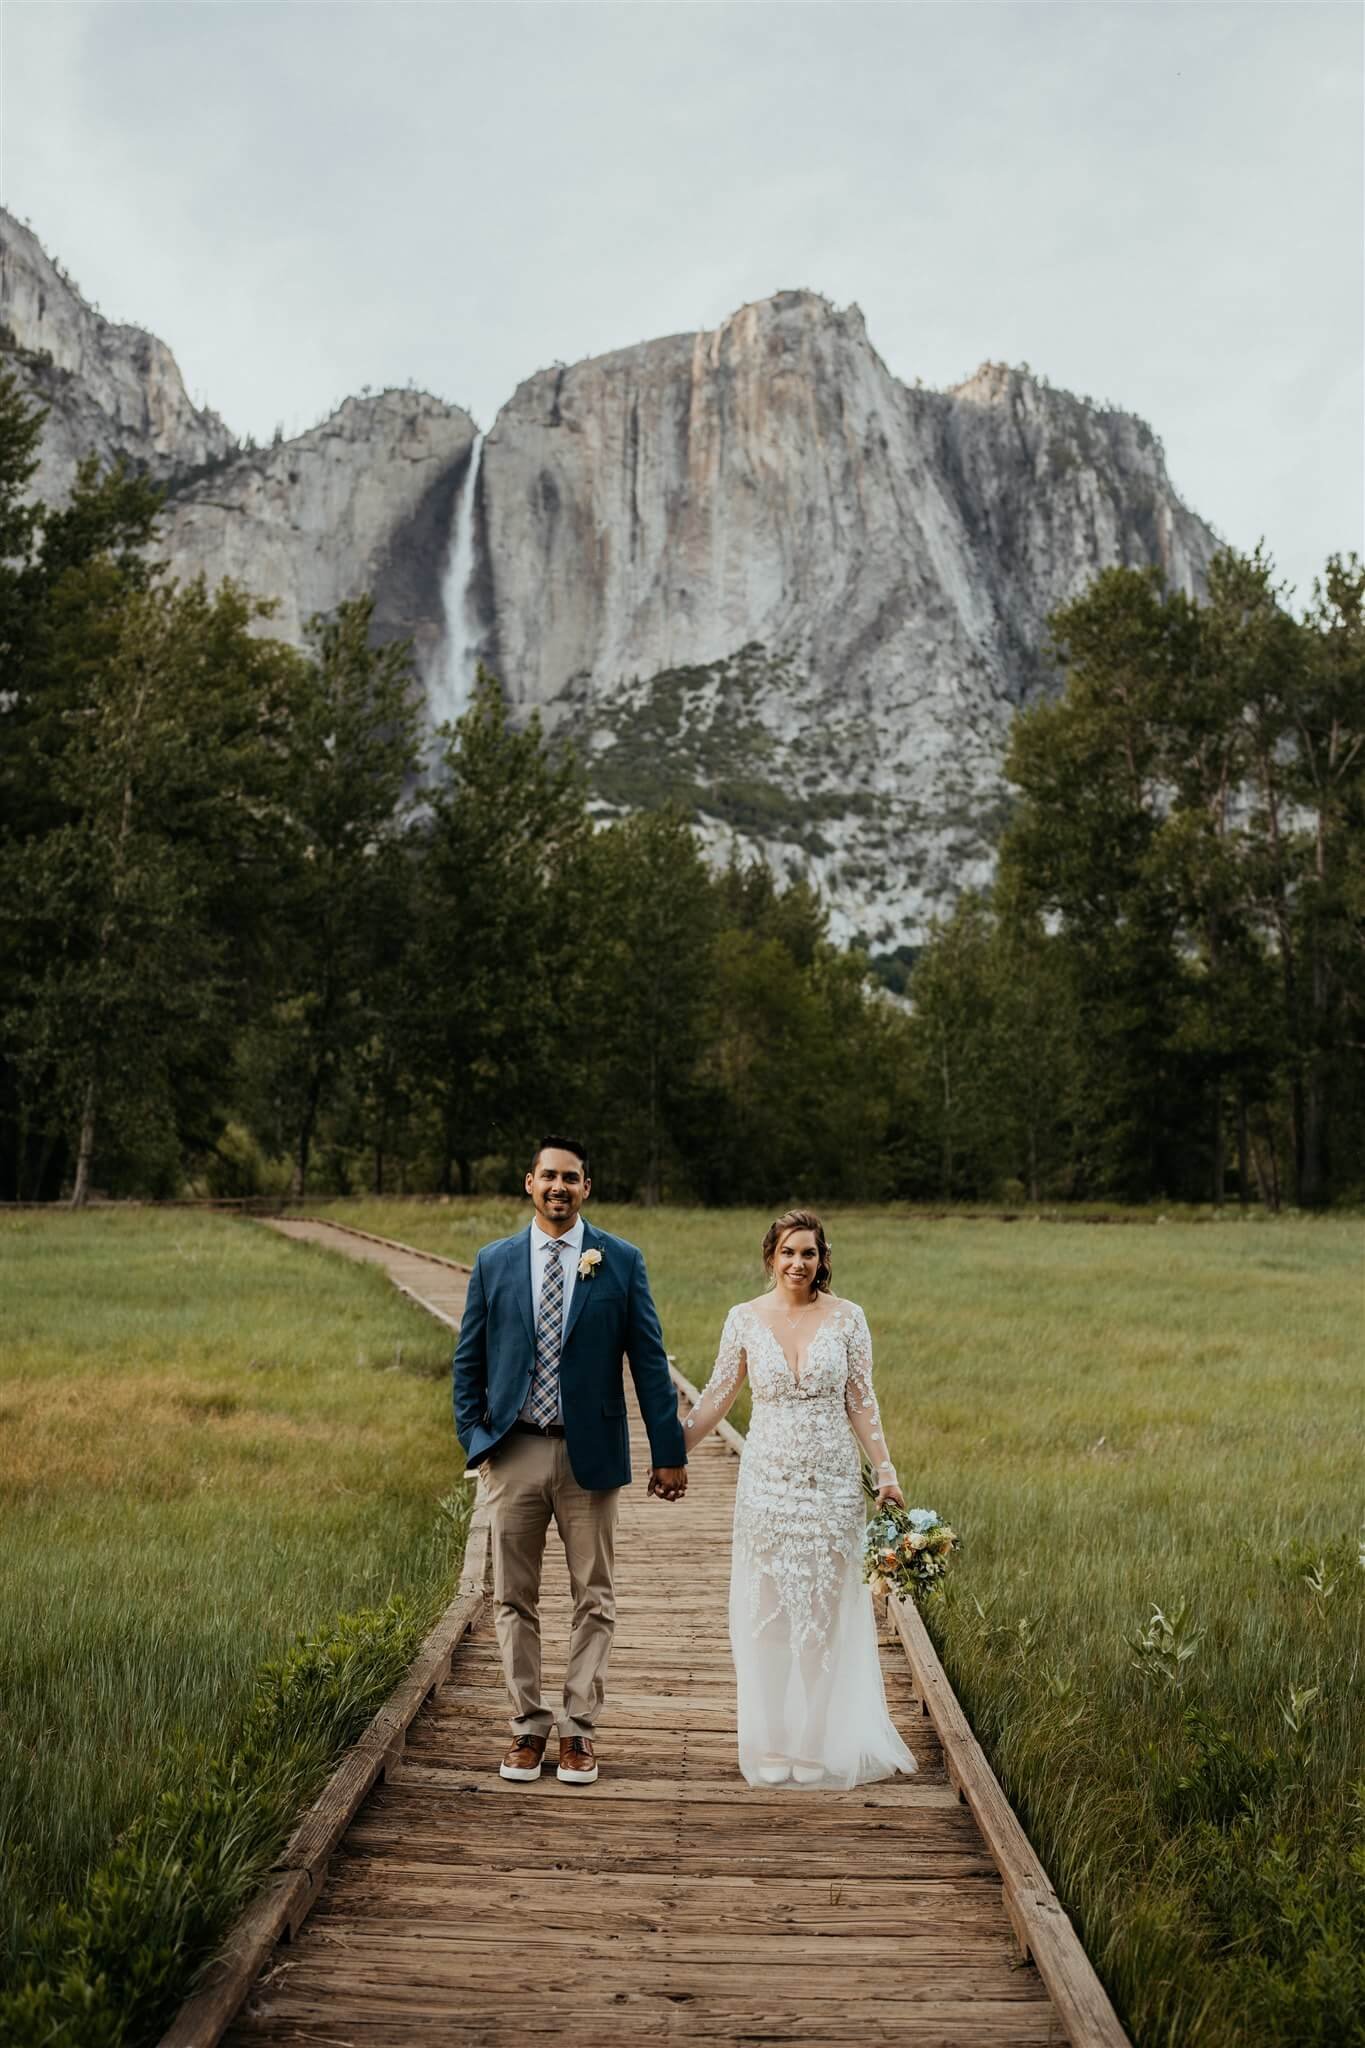 Bride and groom couple portraits at Yosemite National Park